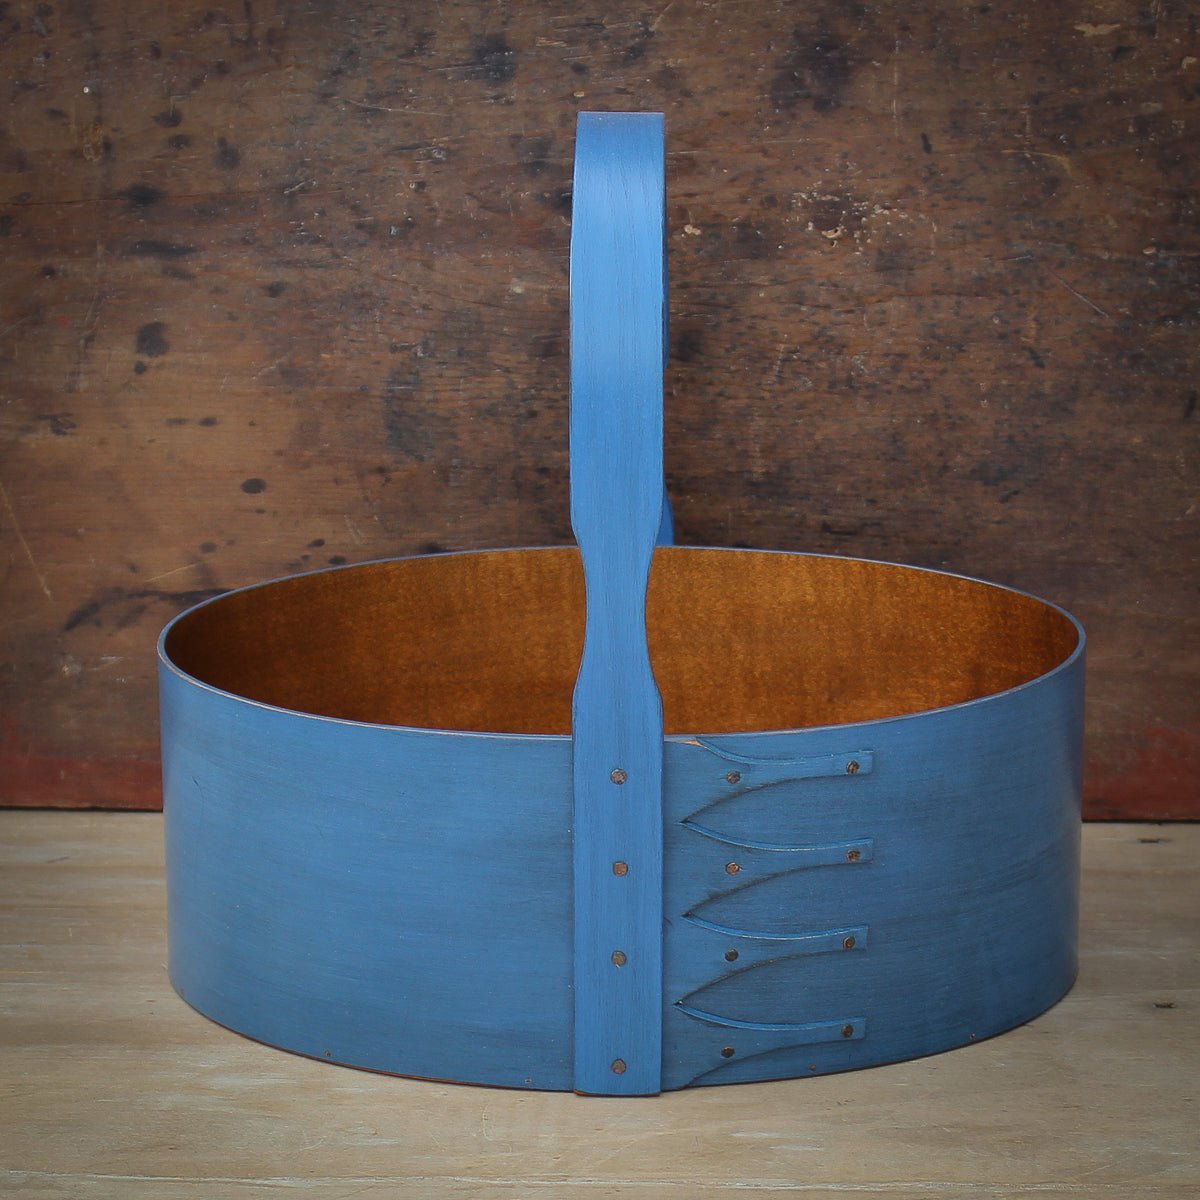 Shaker Carrier, Size #6, LeHays Shaker Boxes, Handcrafted in Maine, Blue Milk Paint Finish, Front View